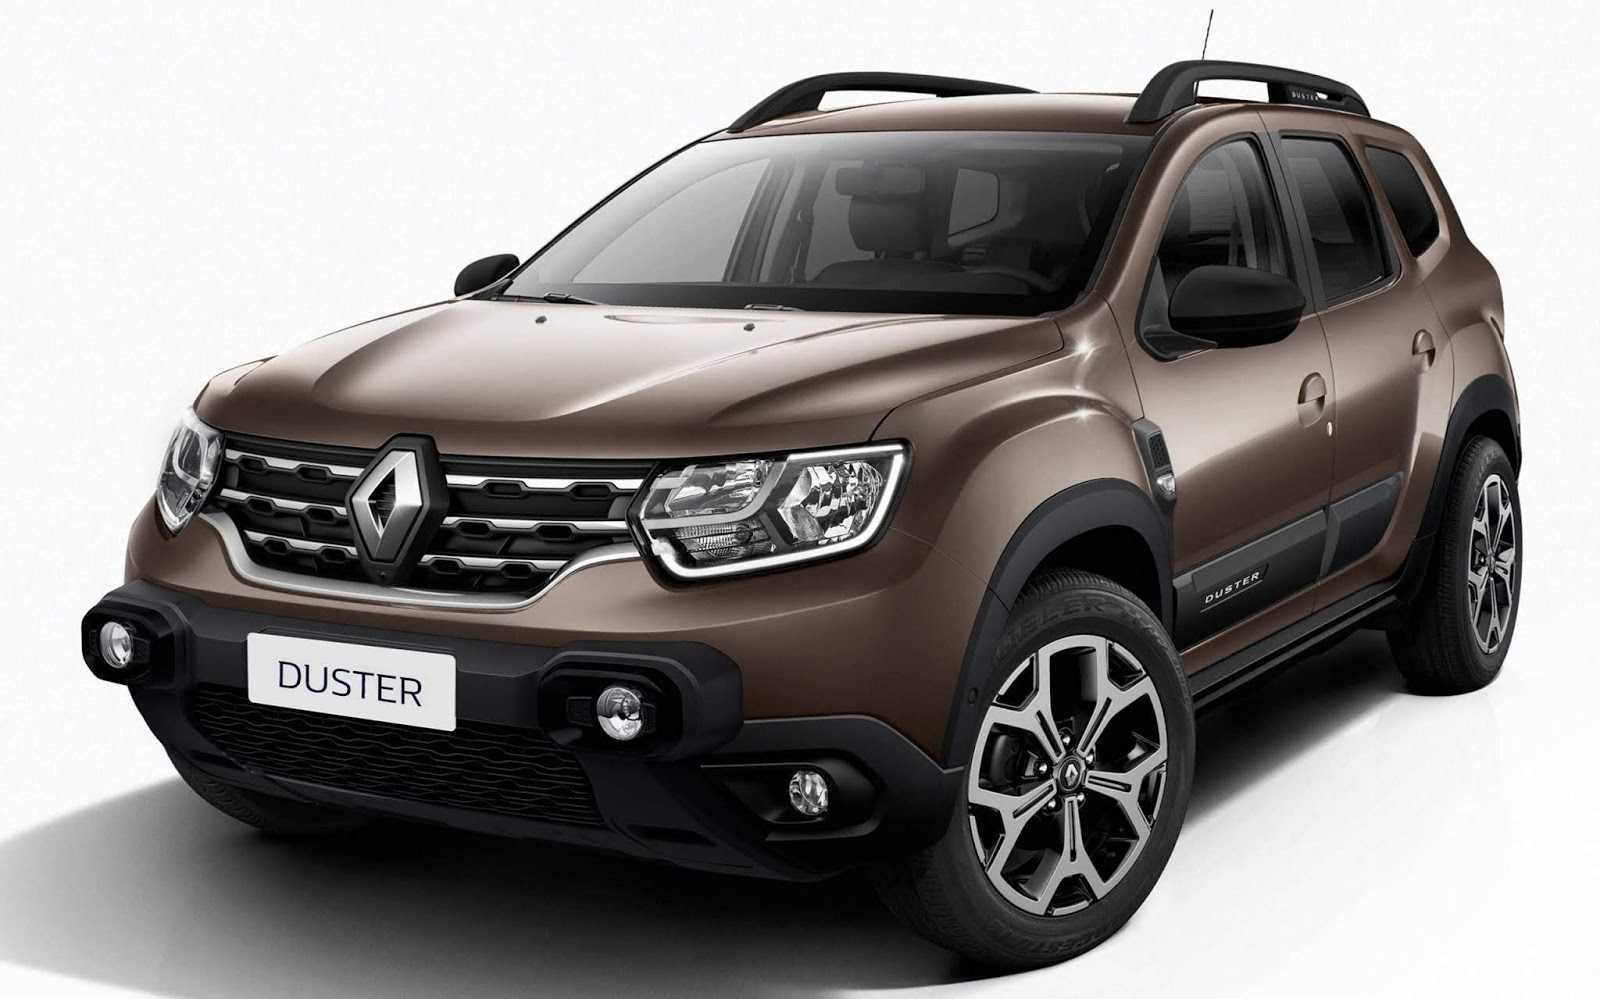 Рено дастер 2021 2.0. Renault Duster 2021. Renault Duster 2018. Новый Рено Дастер 2023. Renault Duster 2.